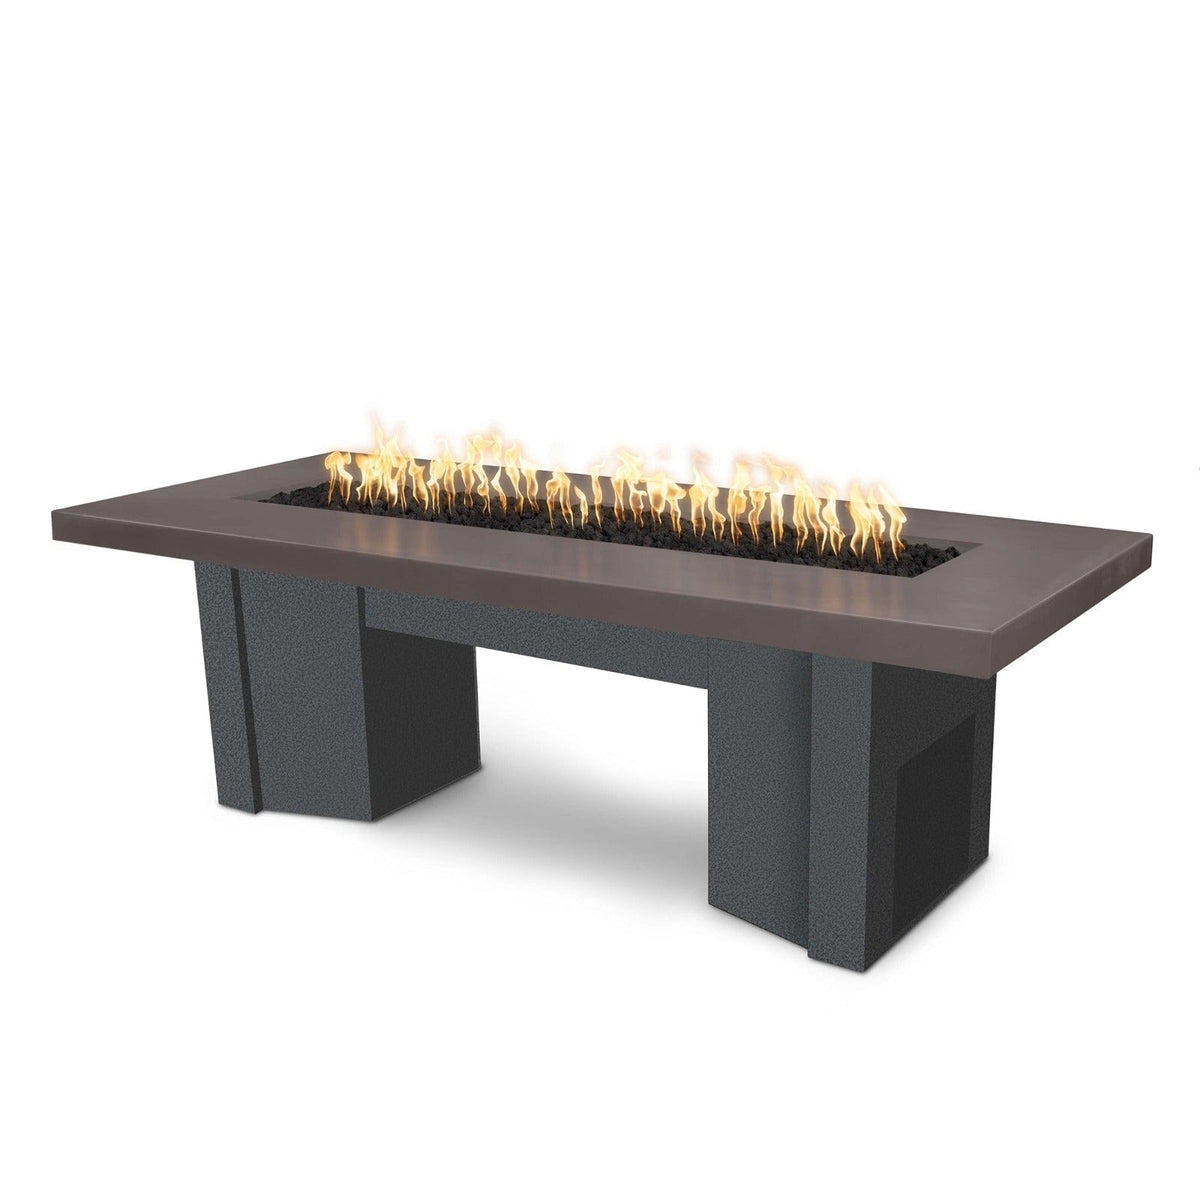 The Outdoor Plus Fire Features Chestnut (-CST) / Silver Vein Powder Coated Steel (-SLV) The Outdoor Plus 78&quot; Alameda Fire Table Smooth Concrete in Liquid Propane - Match Lit with Flame Sense System / OPT-ALMGFRC78FSML-LP